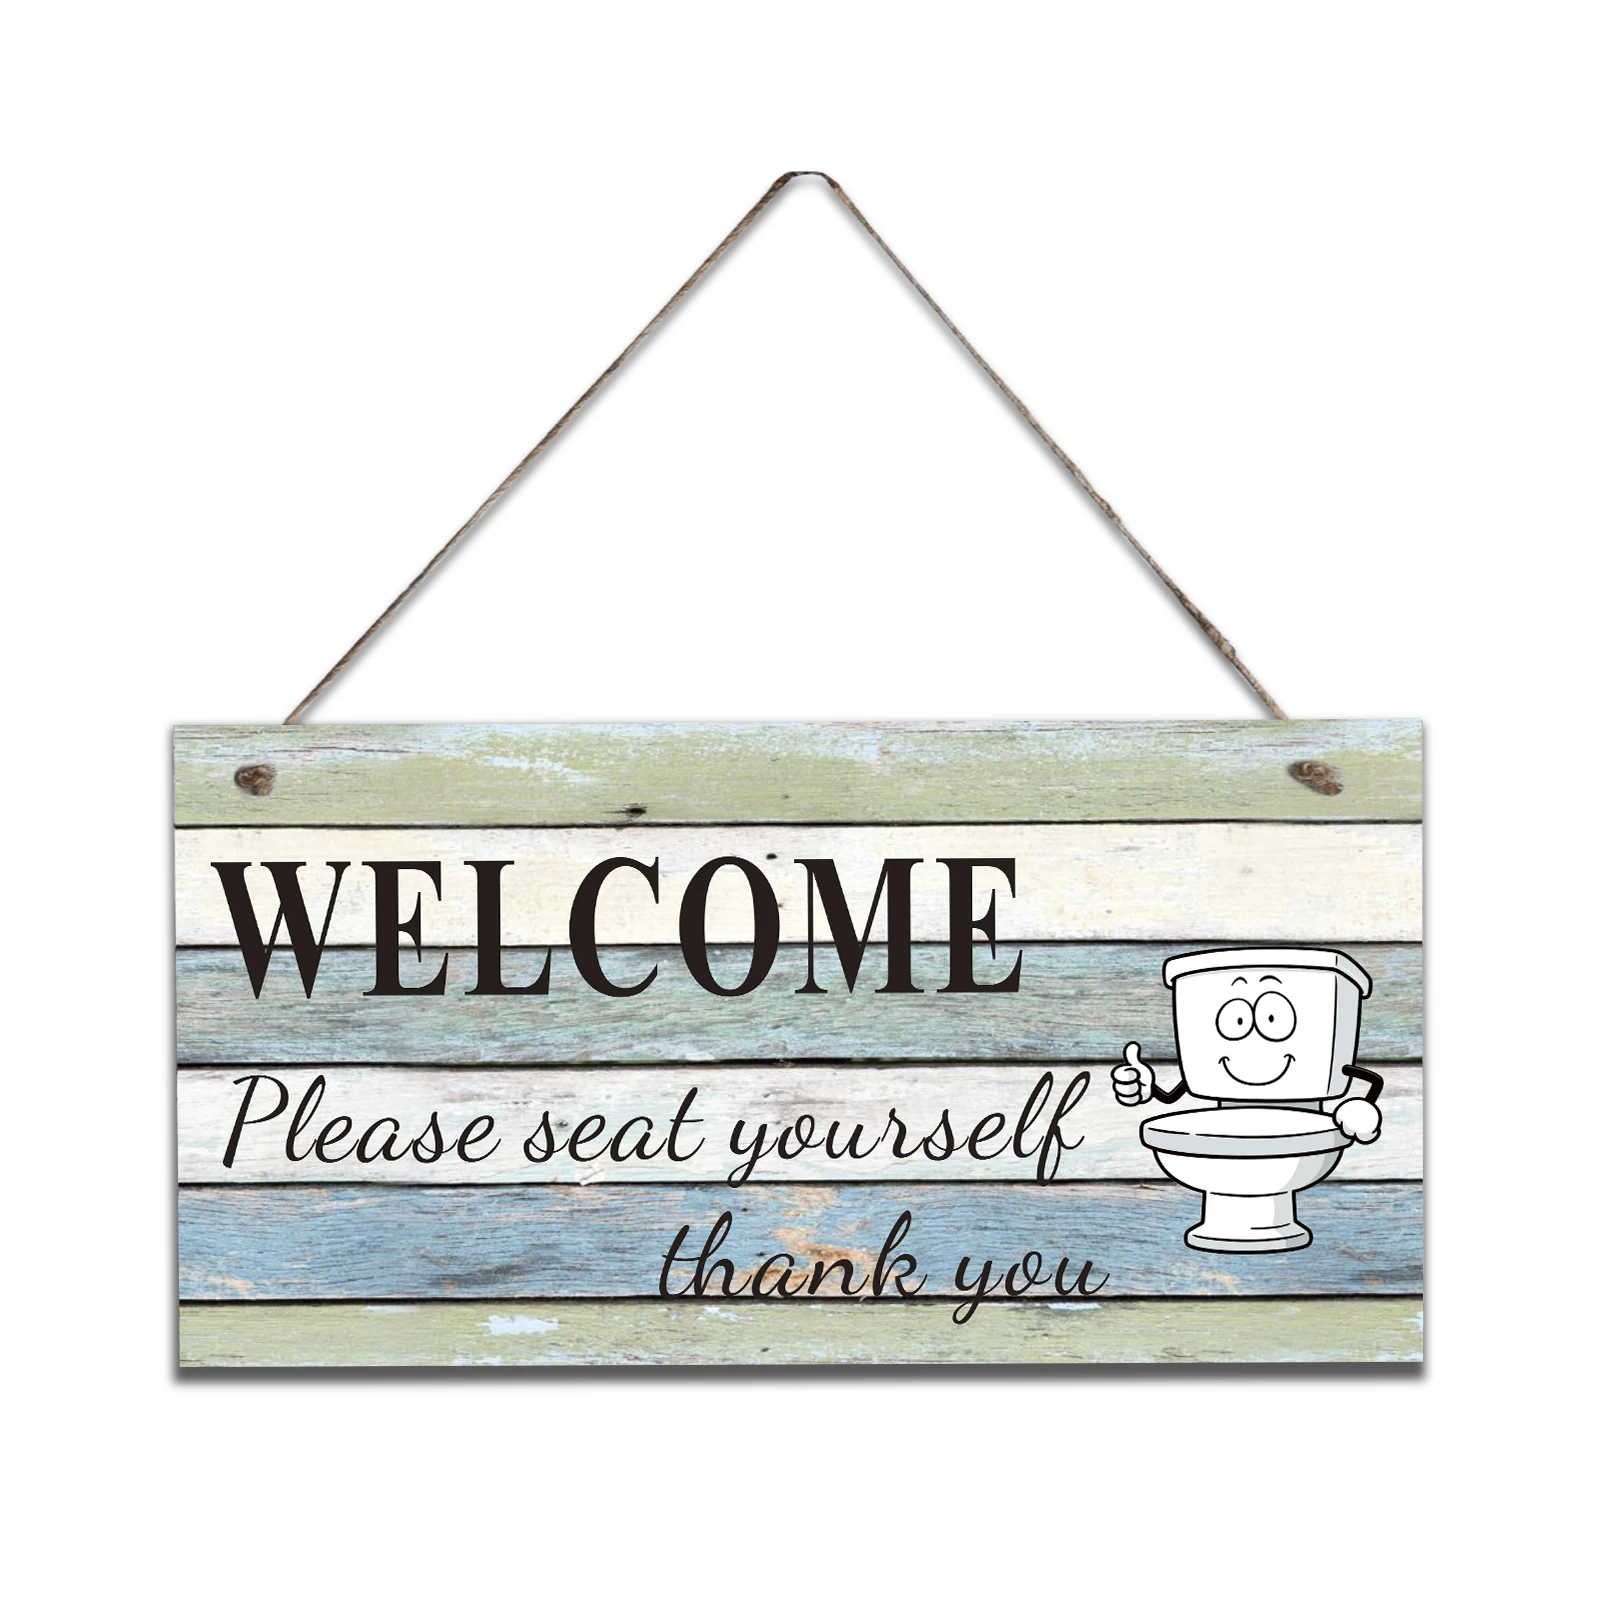 

Custom Wooden Family Wall Plaque Animal-Themed Home Decor Sign for Welcome Front Door or Wall Decoration Model